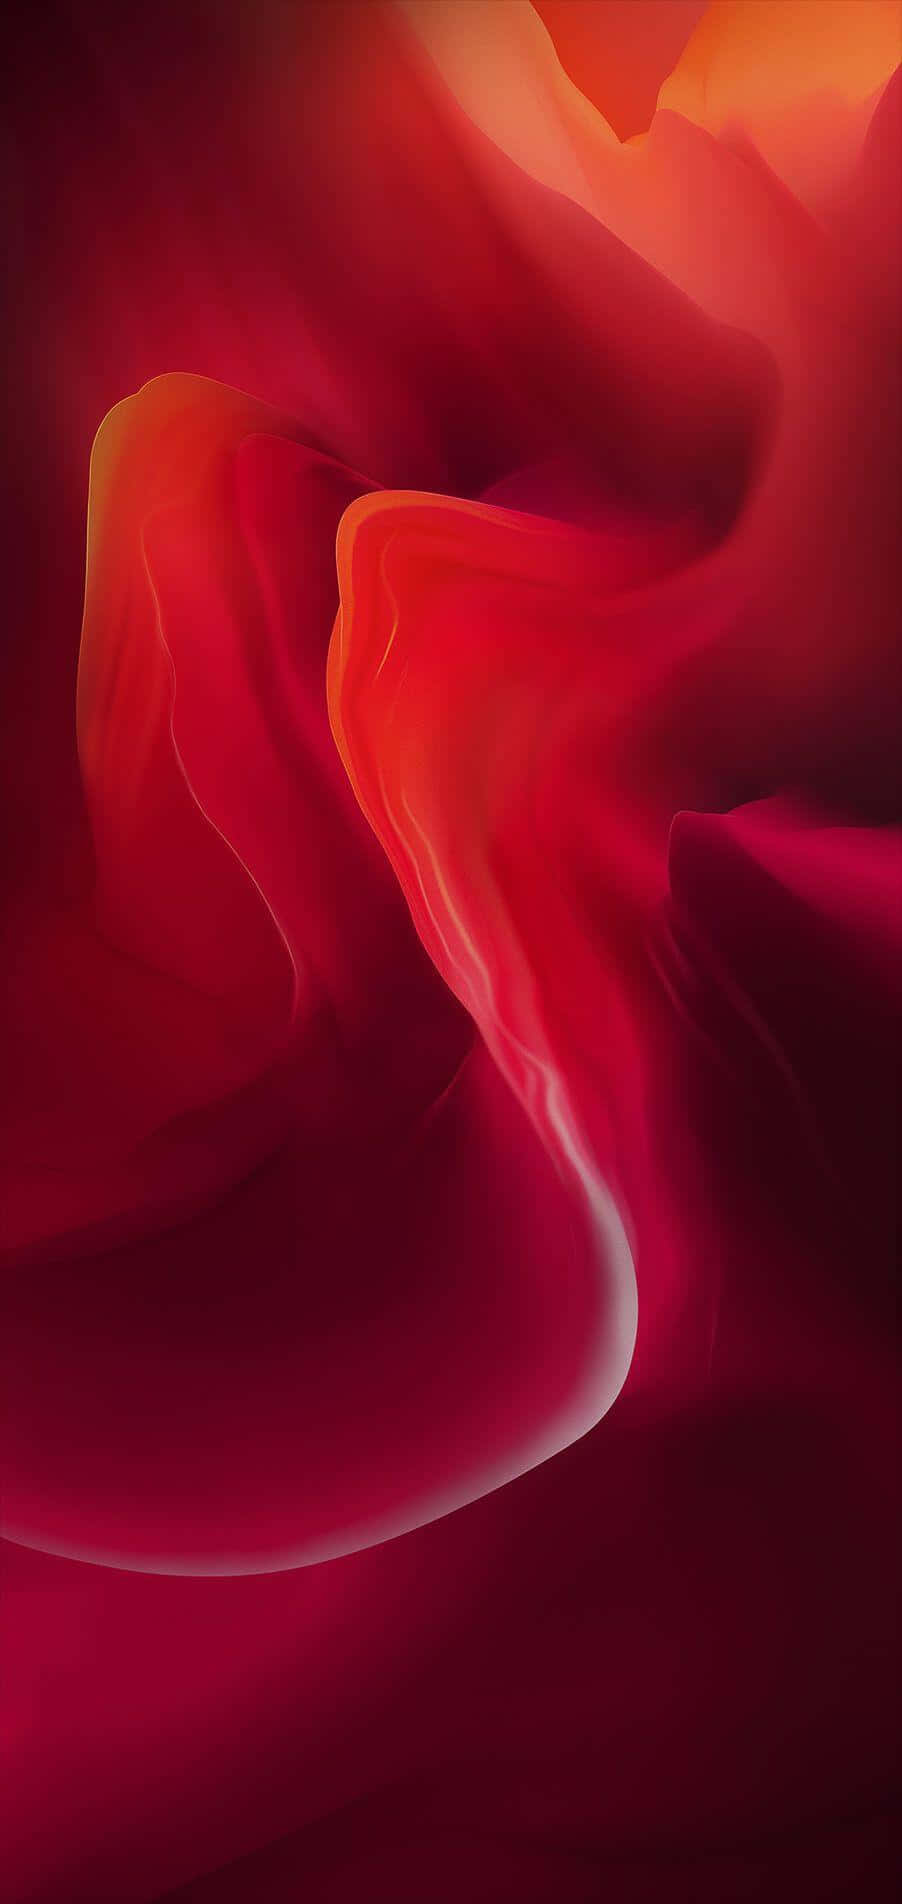 Get your hands on the latest model of Iphone X in Red Wallpaper